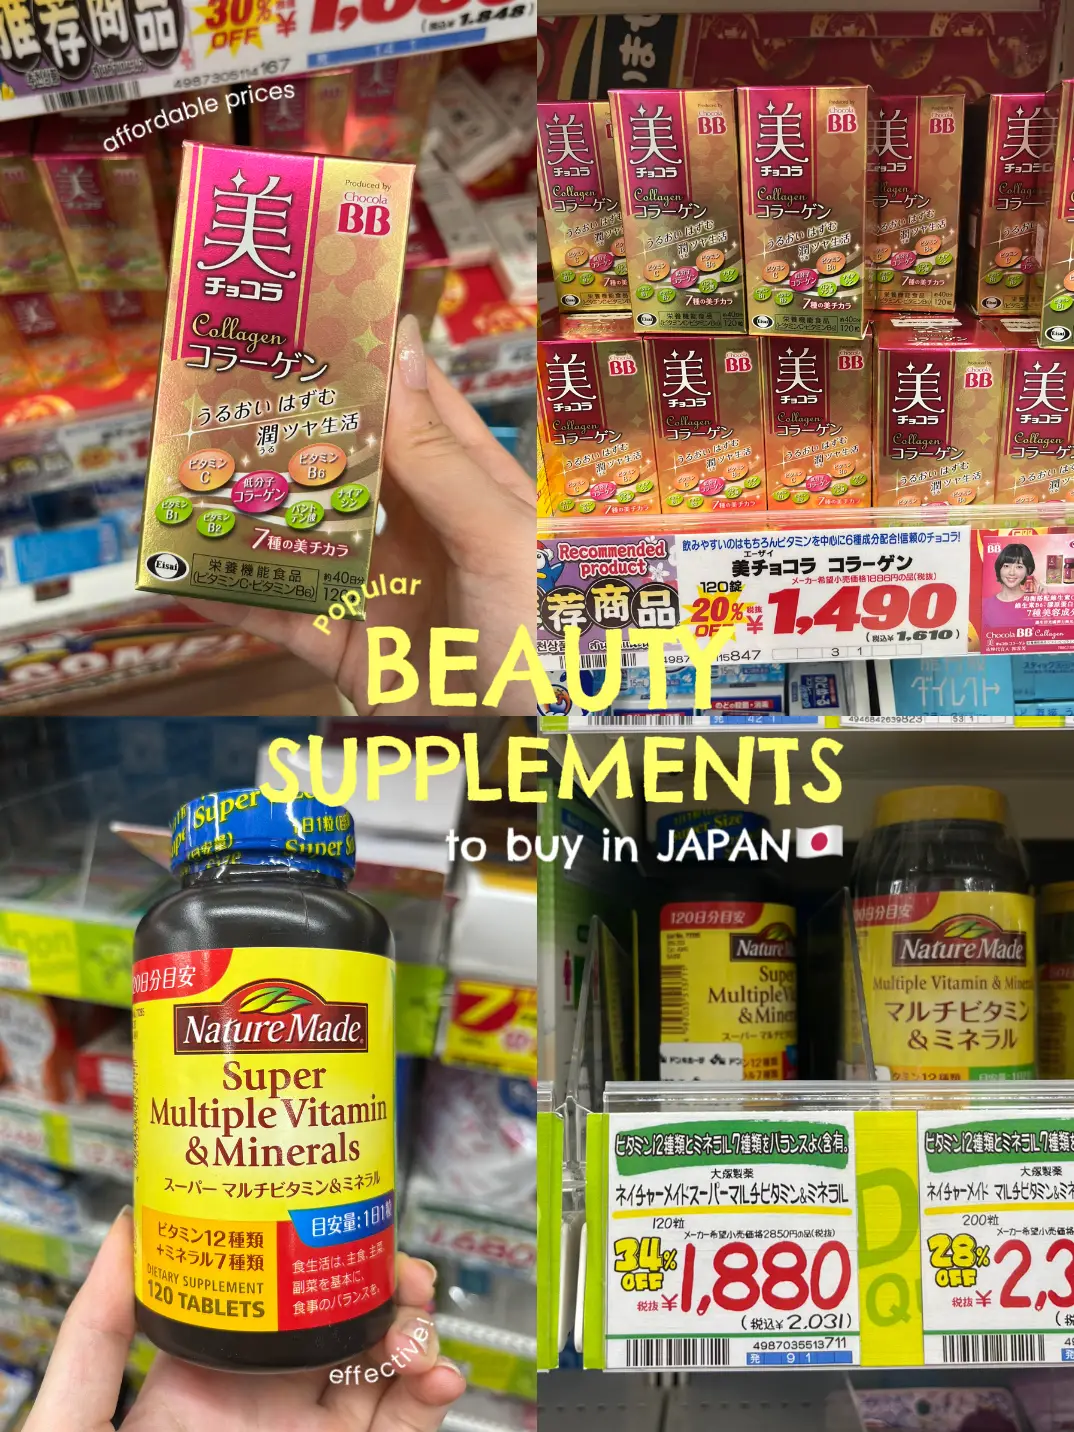 must-buy beauty supplements from japan🇯🇵's images